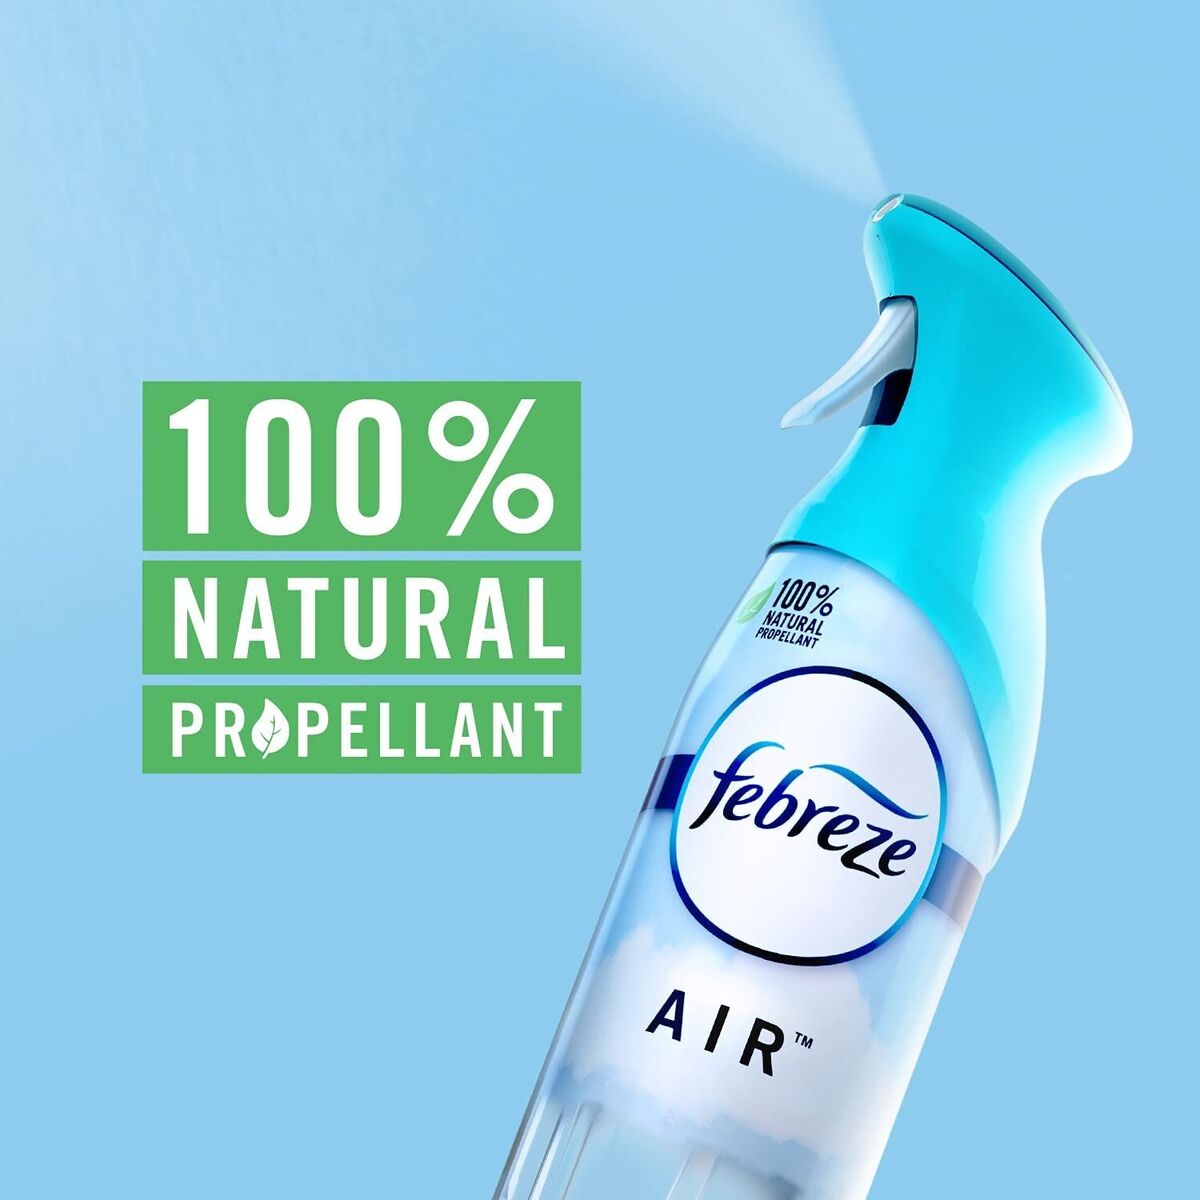 What Air Freshener Removes Odors The Best?